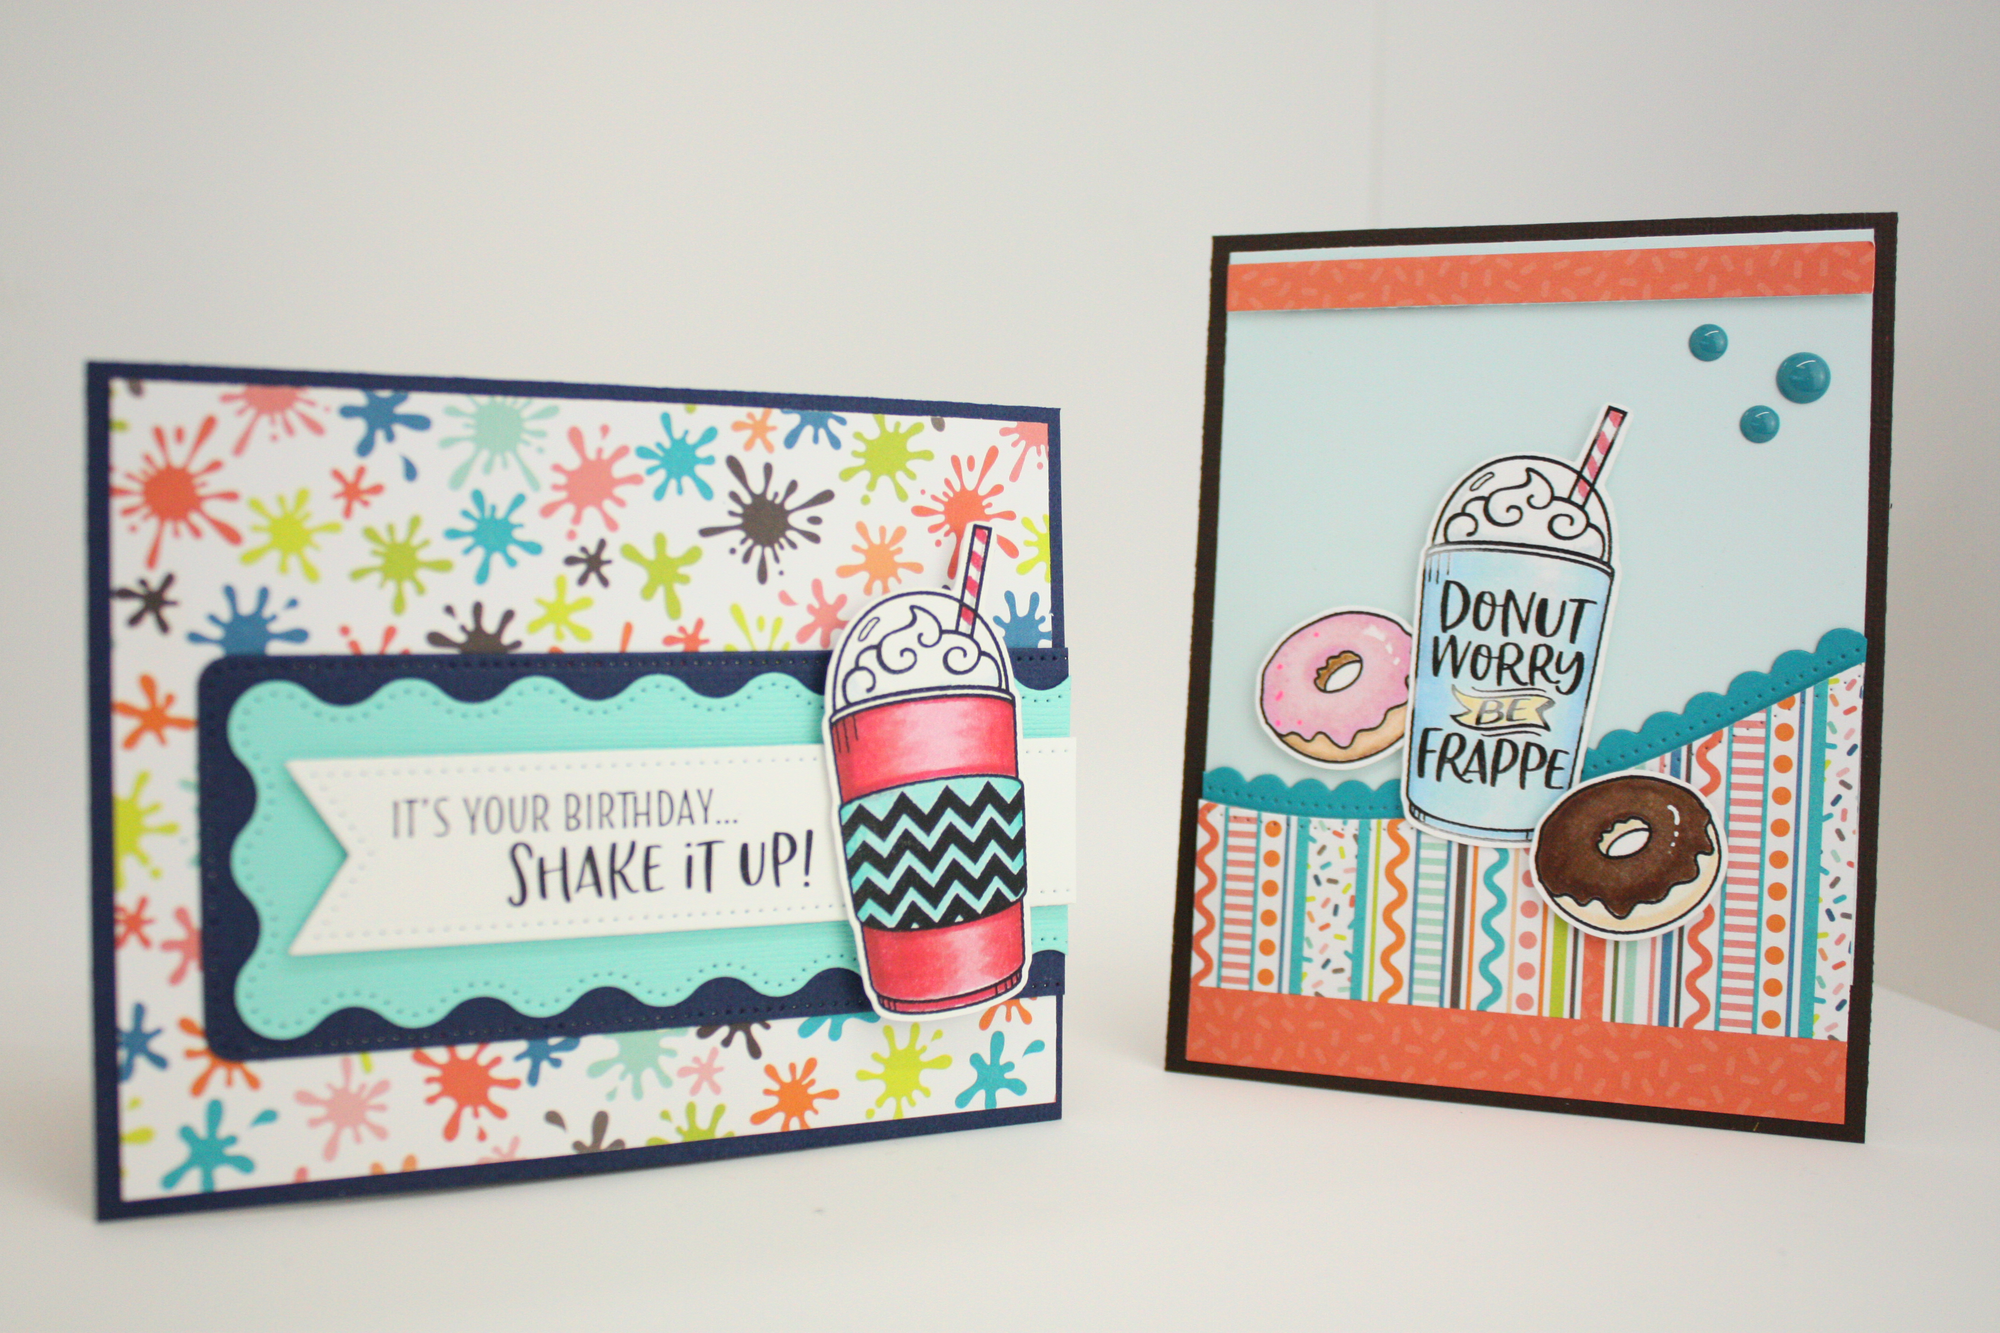 Two handmade cards using the stamp set, "Be Frappe" from Dare 2B Artzy. Images of a frappe with two donuts and the sentiments say, "Donut worry be frappe" and "It's your birthday, shake it up".